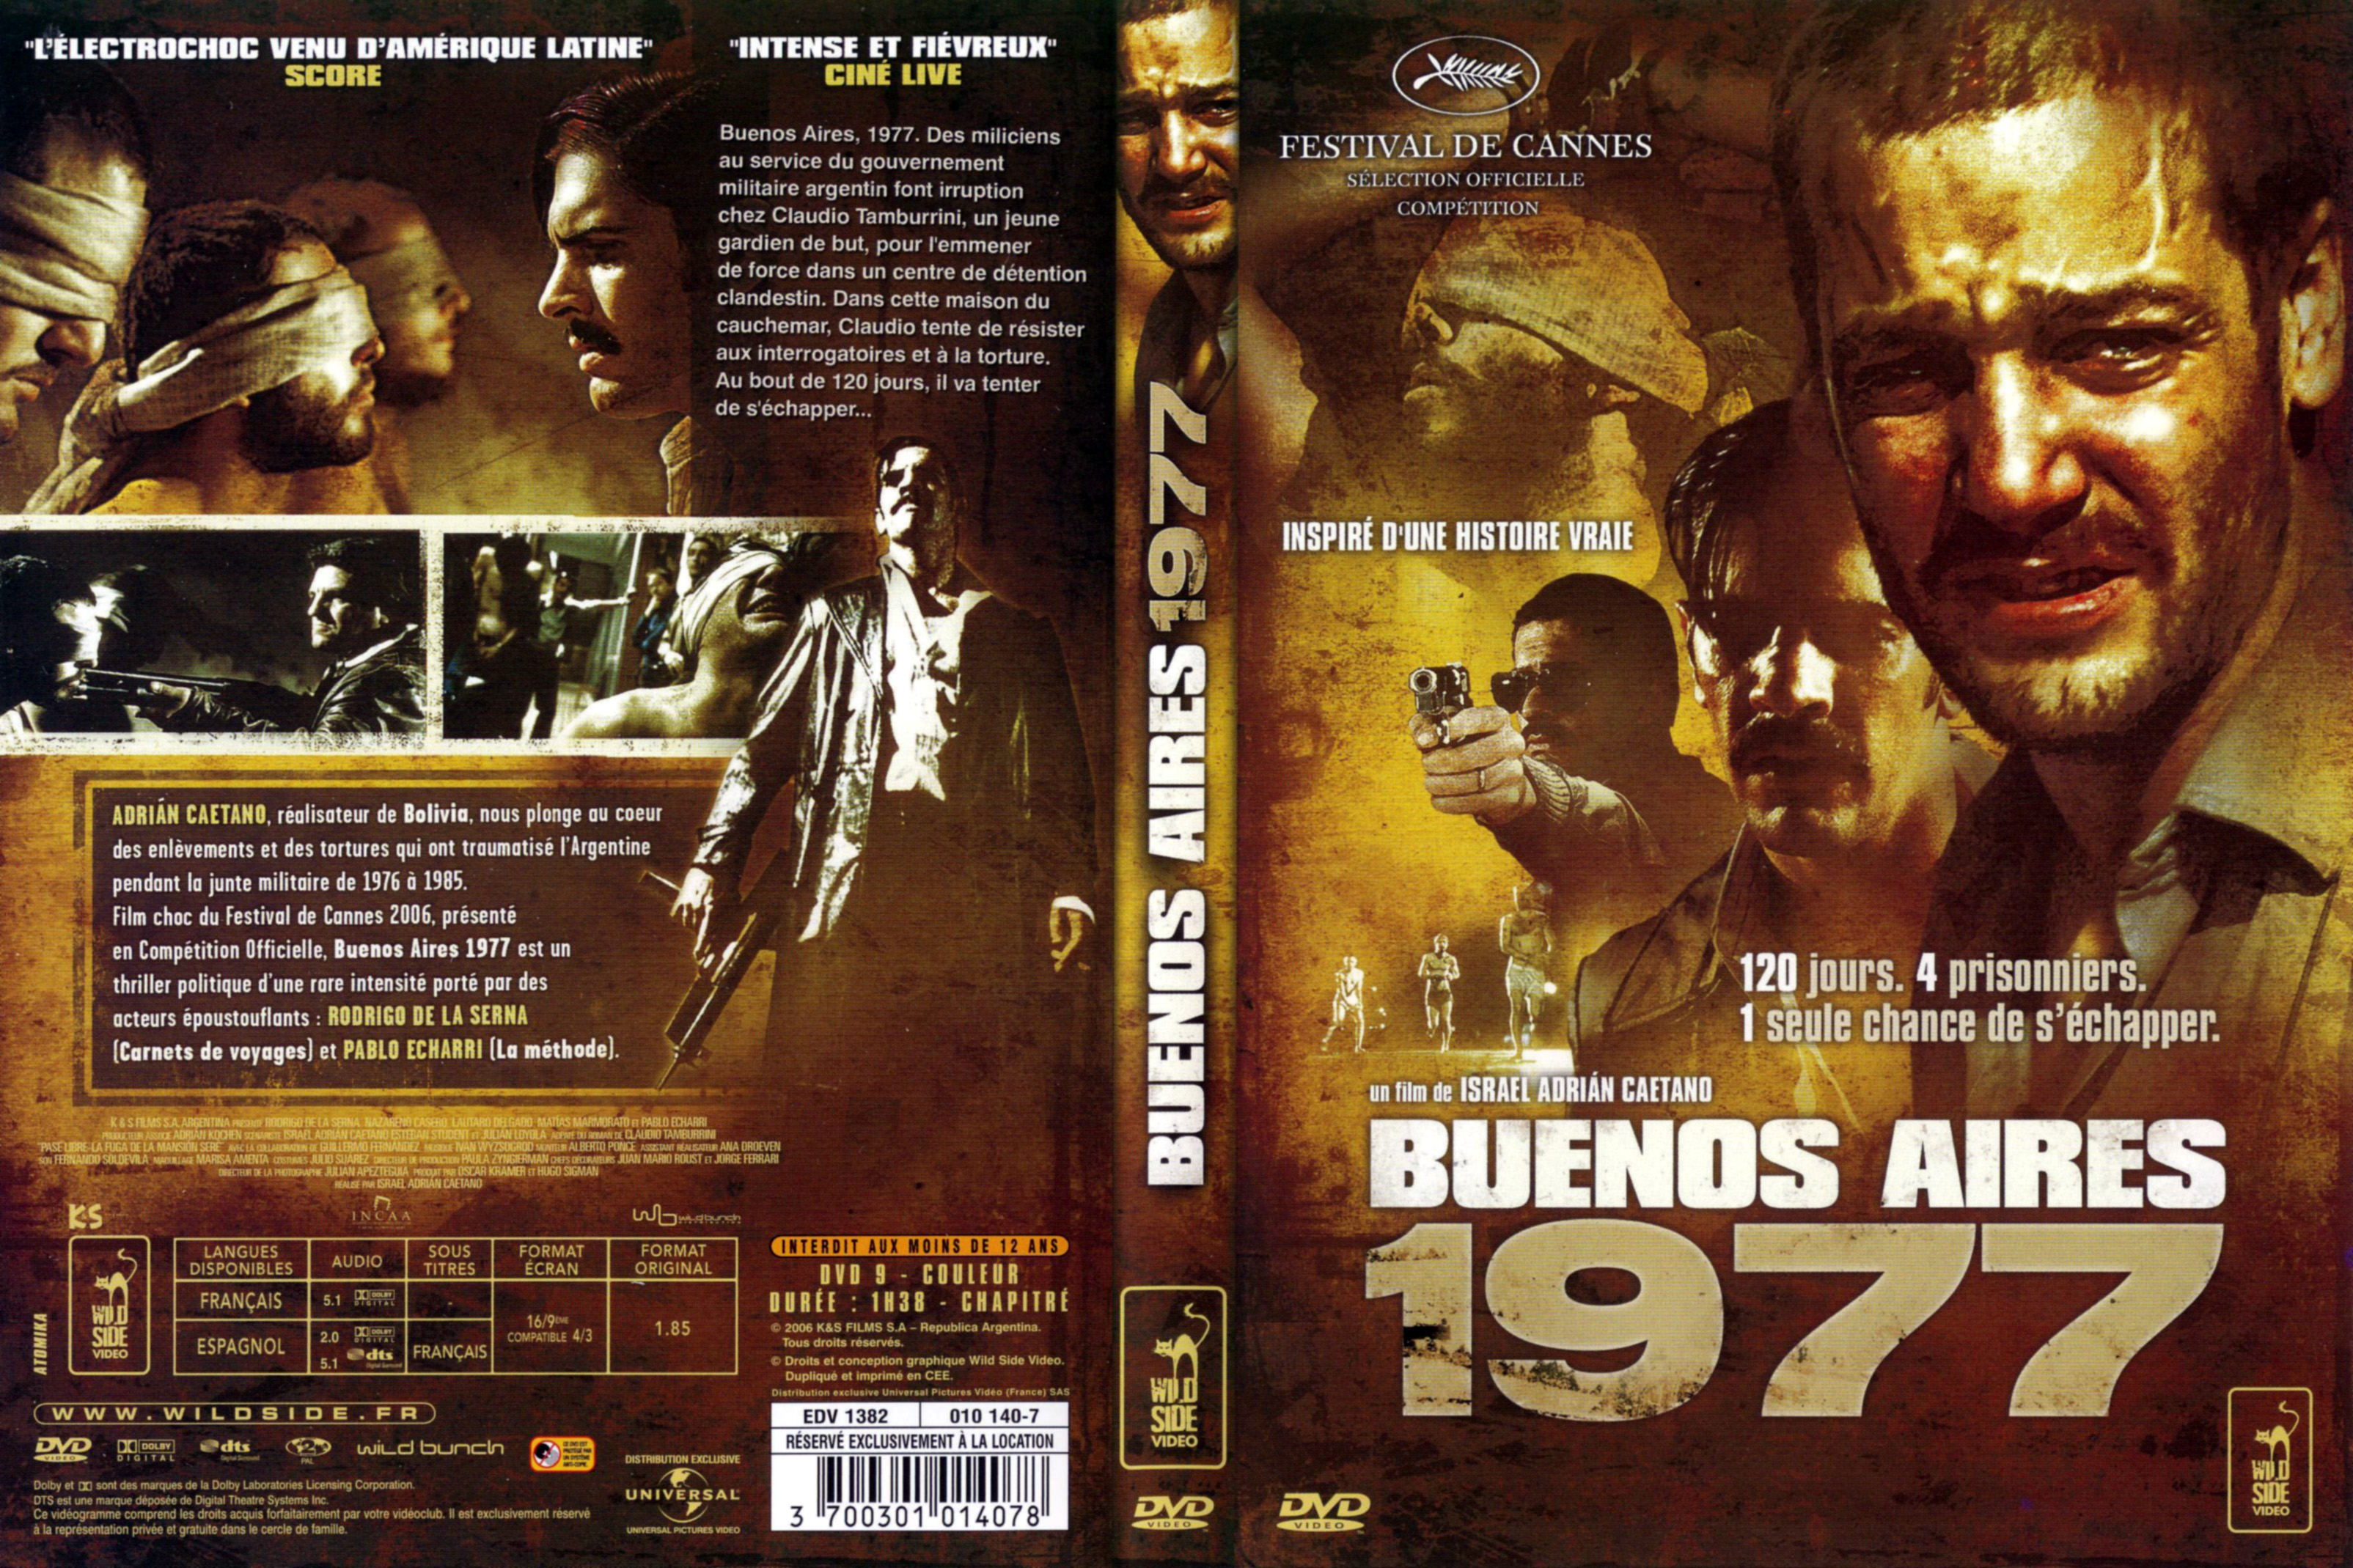 Jaquette DVD Buenos aires 1977